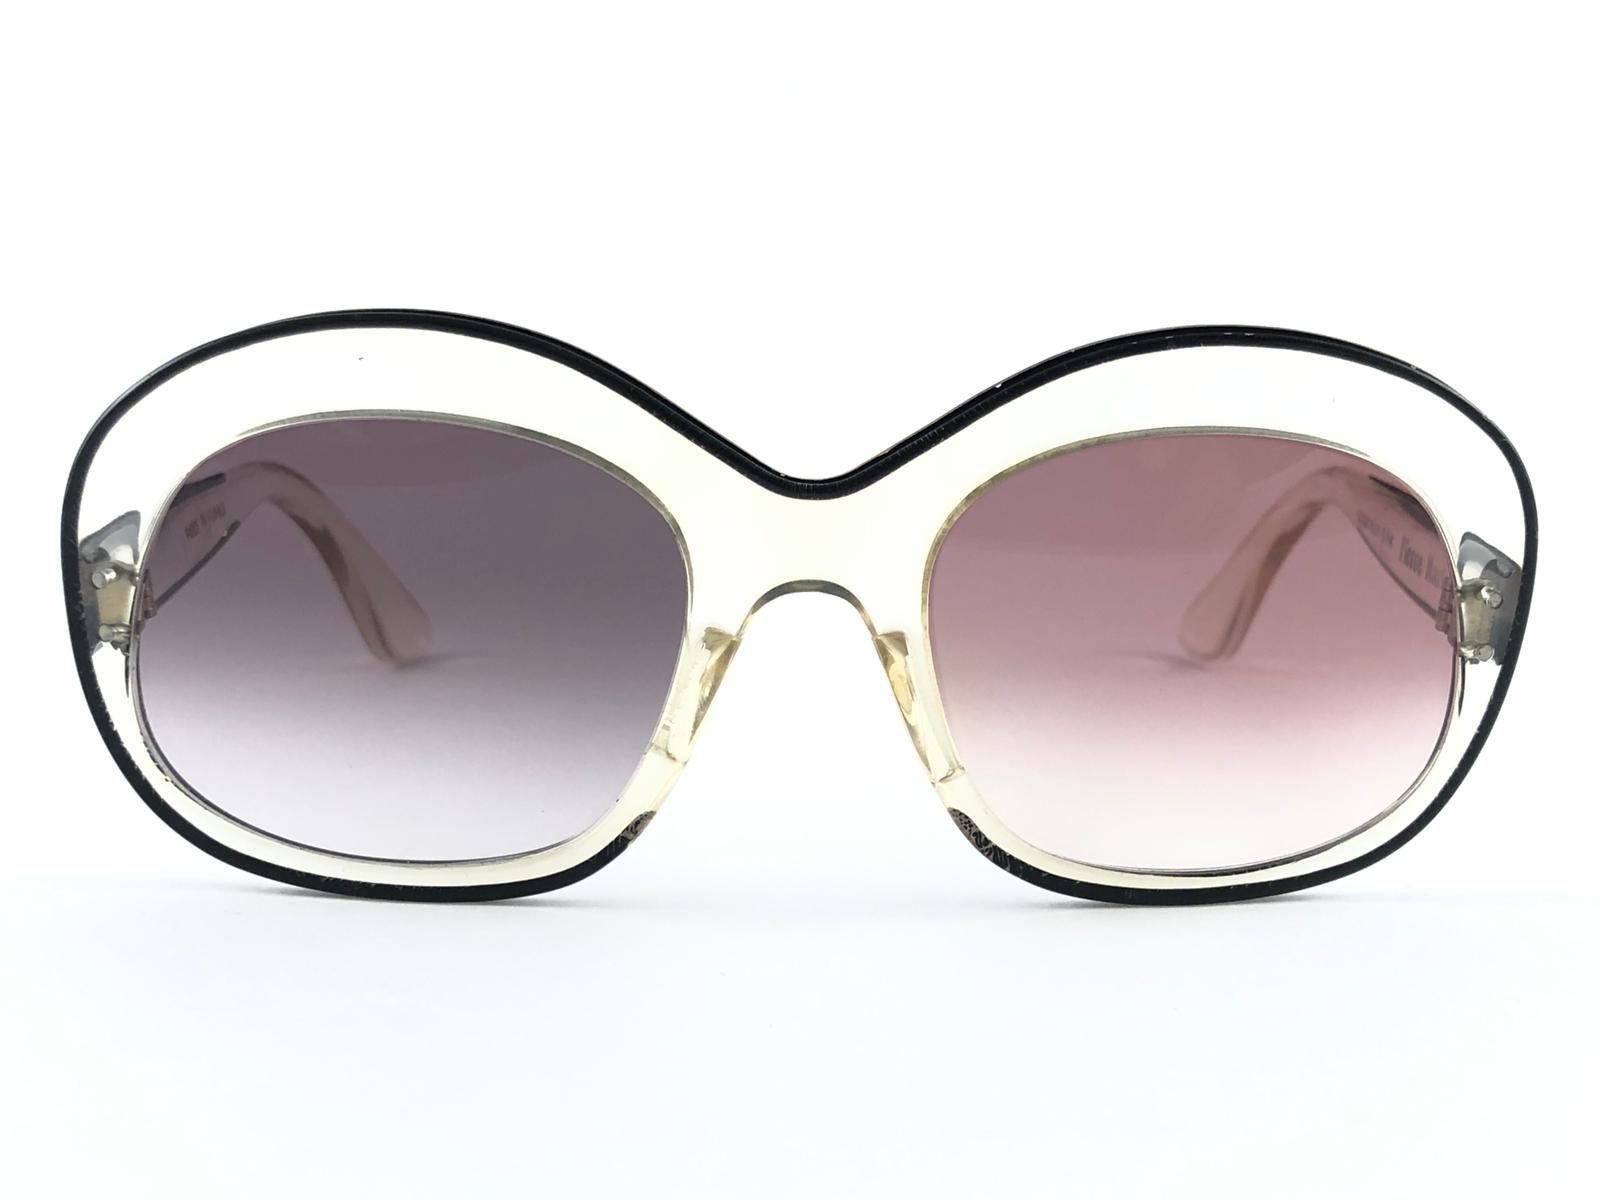 New and ultra rare Pierre Marly Sourcilla sunglasses. Spotless two different lens colors adding up to the feel of this fashion forward frame.

Amazing clear frame. Chic and crazy 1960’s Pierre Marly very own cocktail scene. 

A real treasure not to